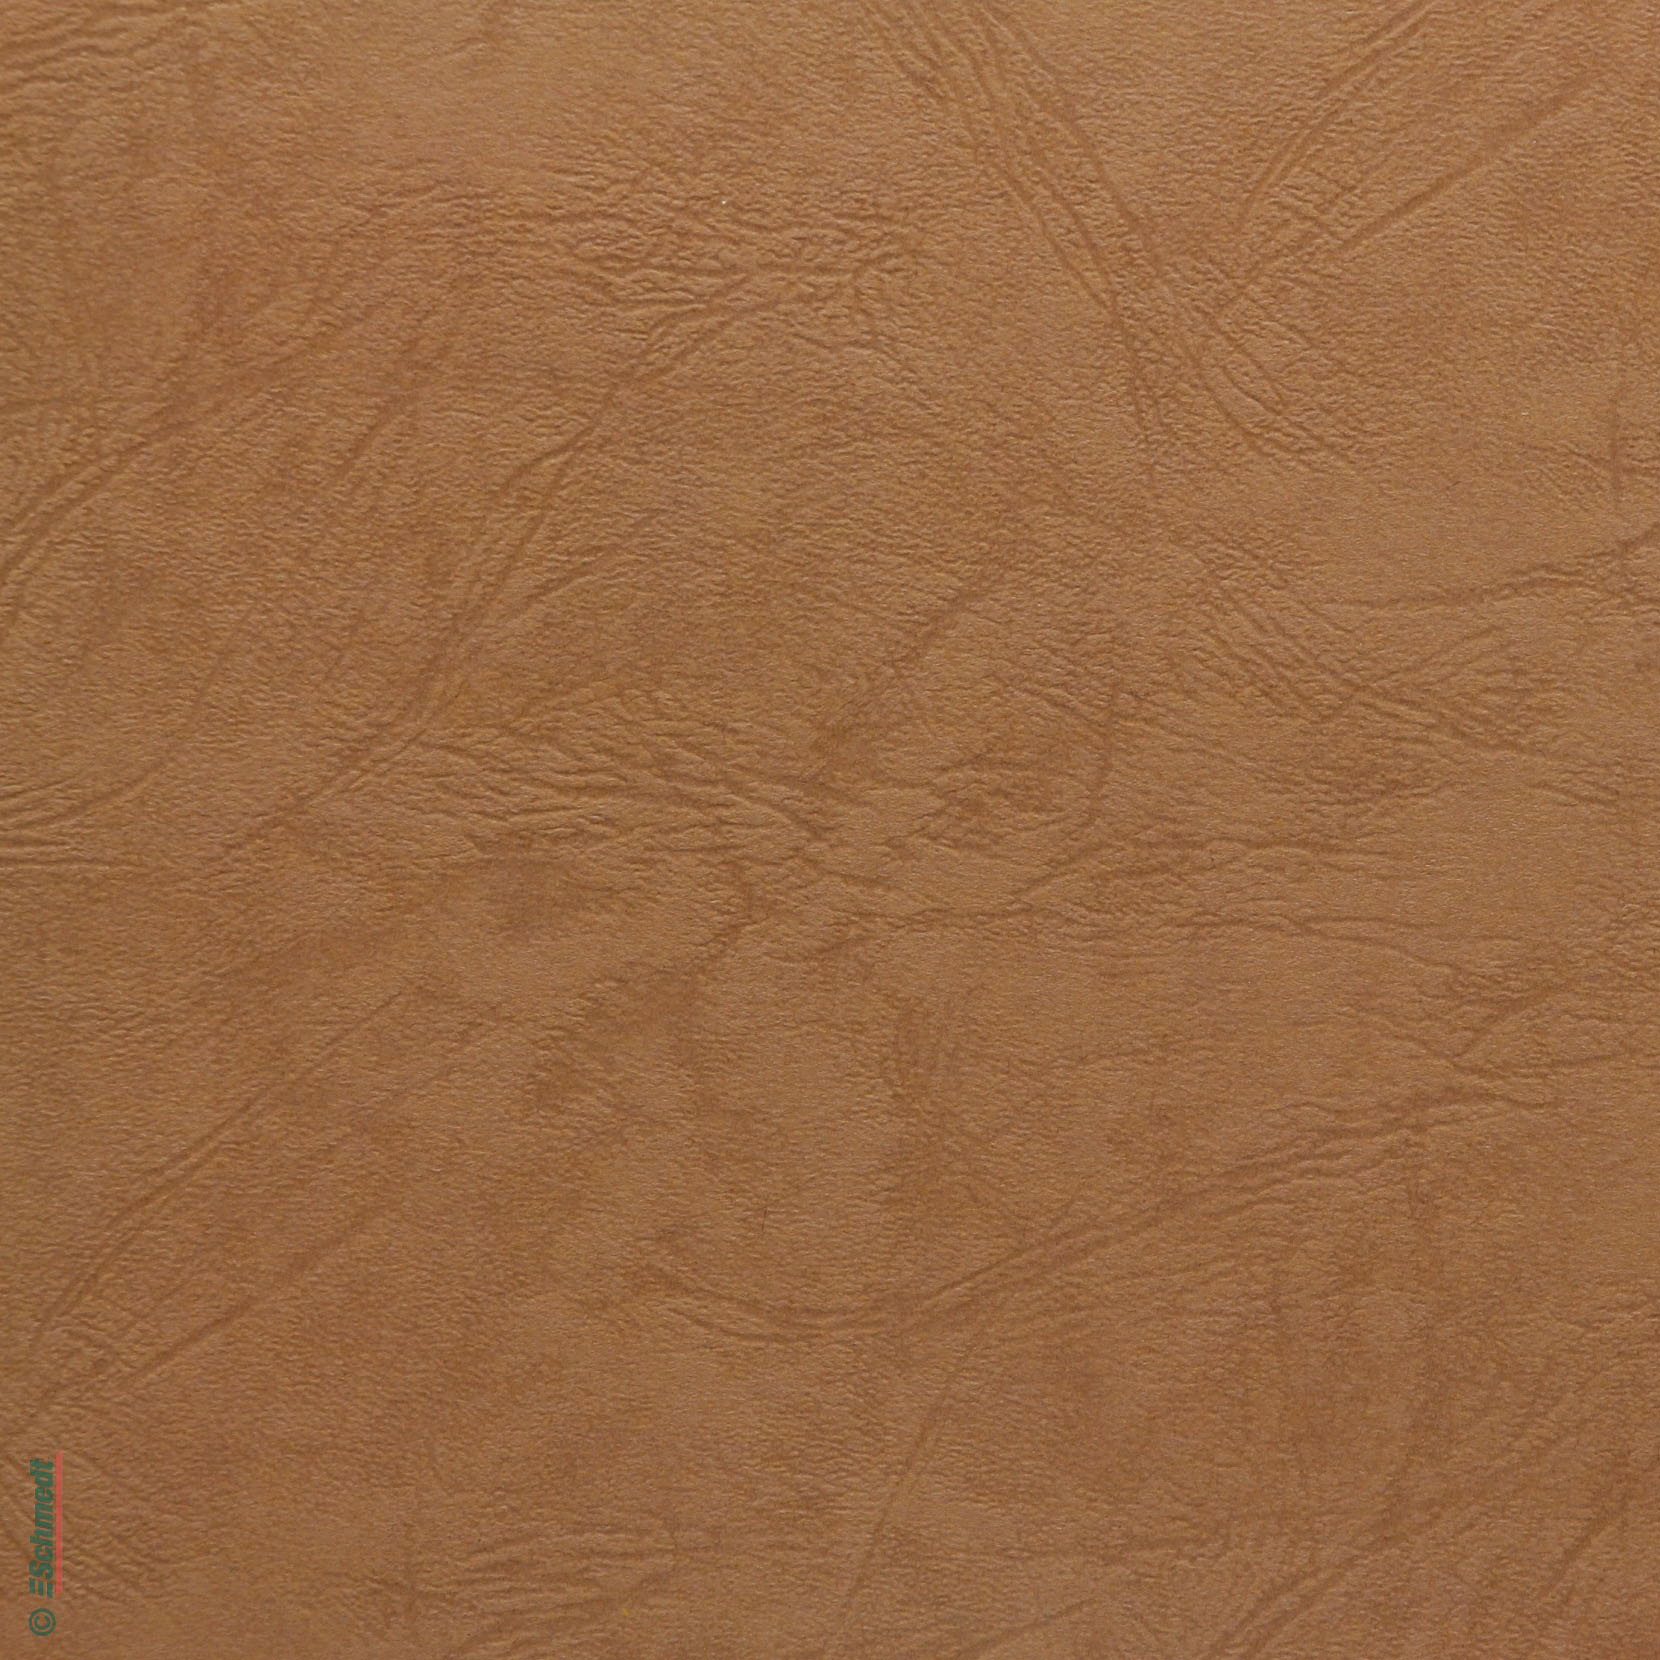 Cover board - leather emboss - Colour 008 - light brown - used as cover for books and brochures, for folders, model making, greeting cards o...